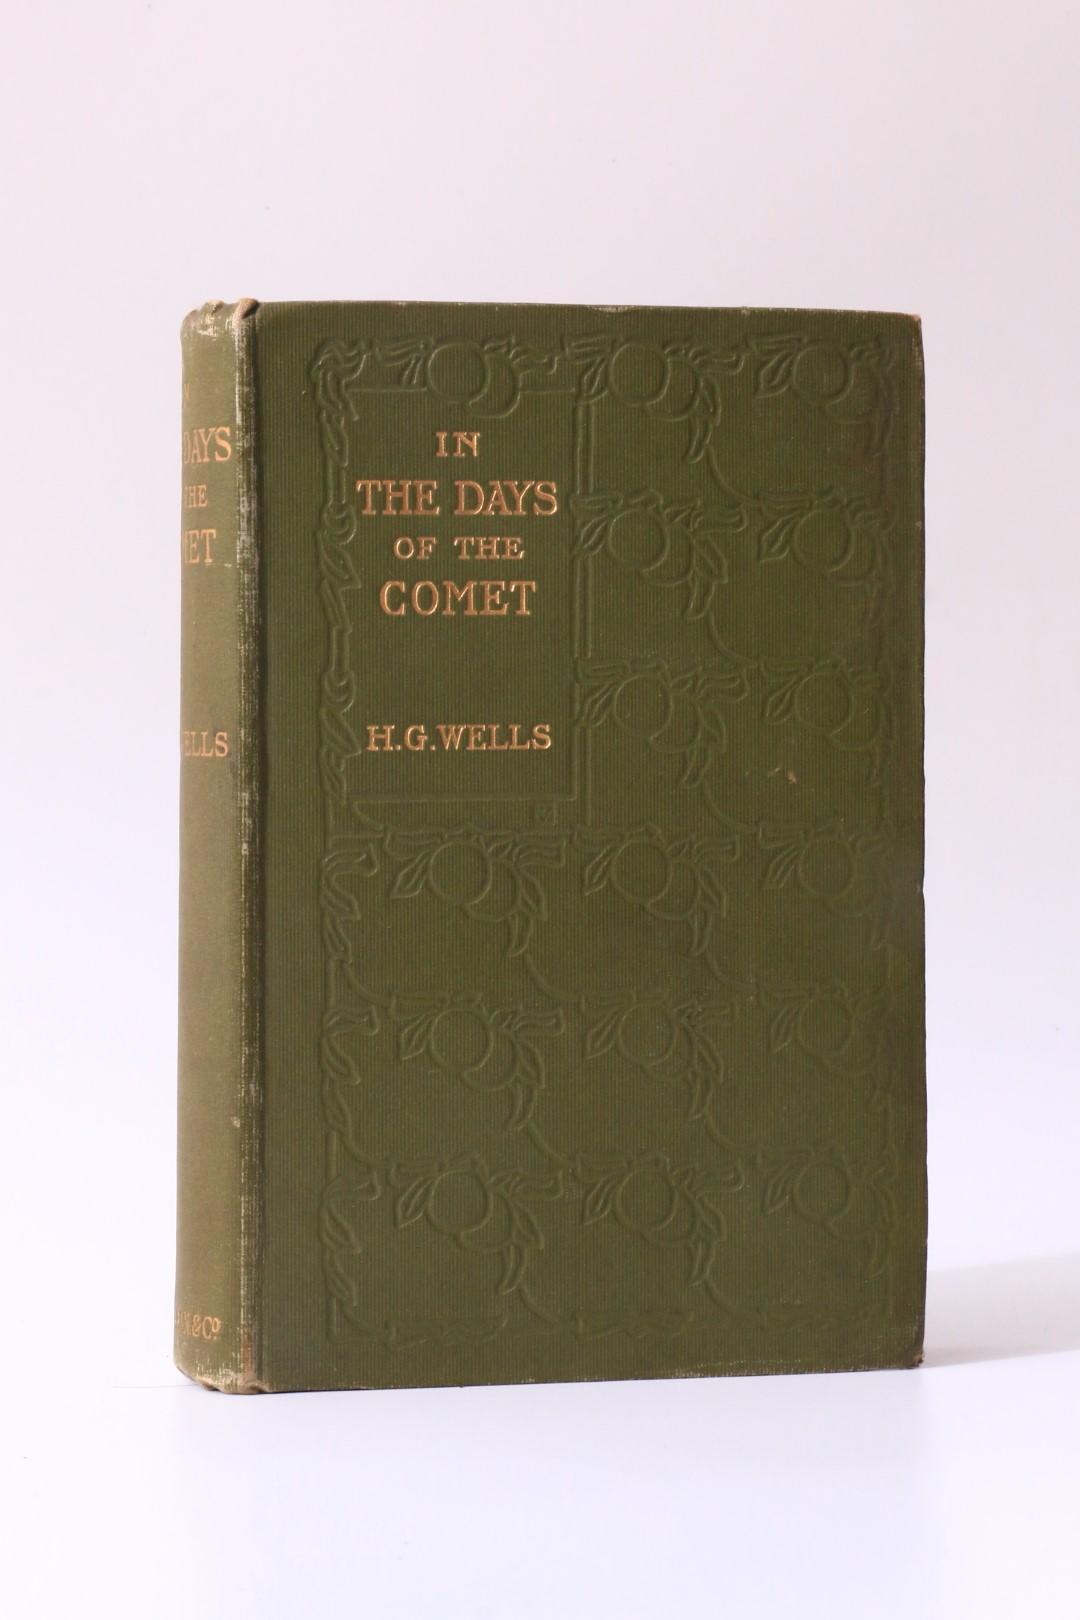 H.G. Wells - In the Days of the Comet - Macmillan, 1906, First Edition.